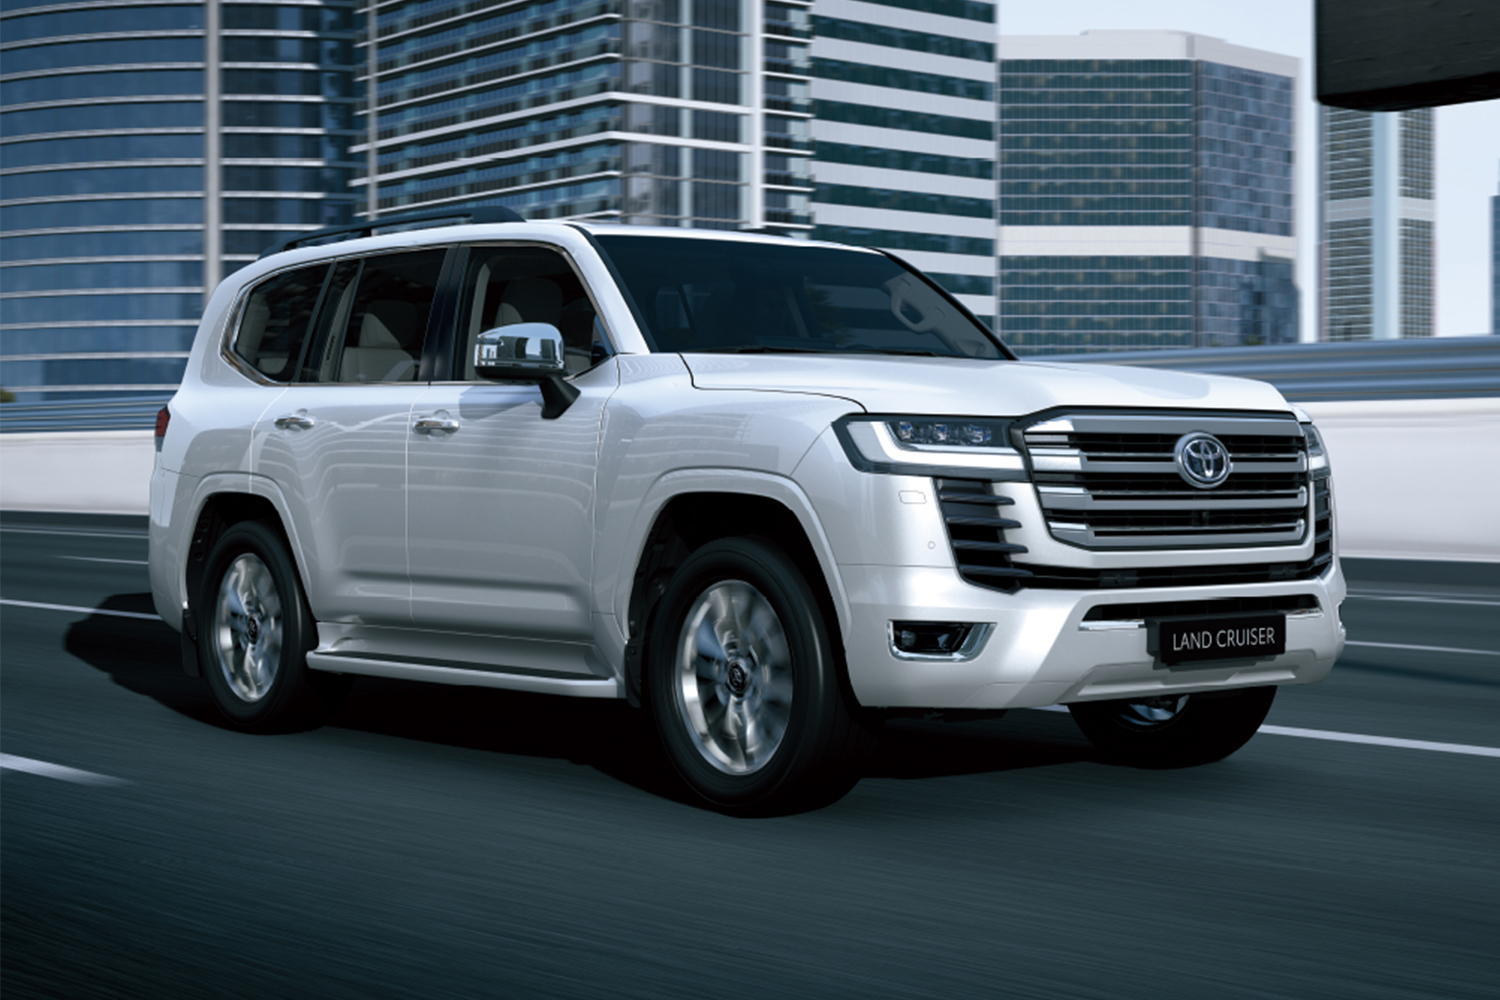 The 2022 Toyota Land Cruiser SUV in white driving down a road in the city